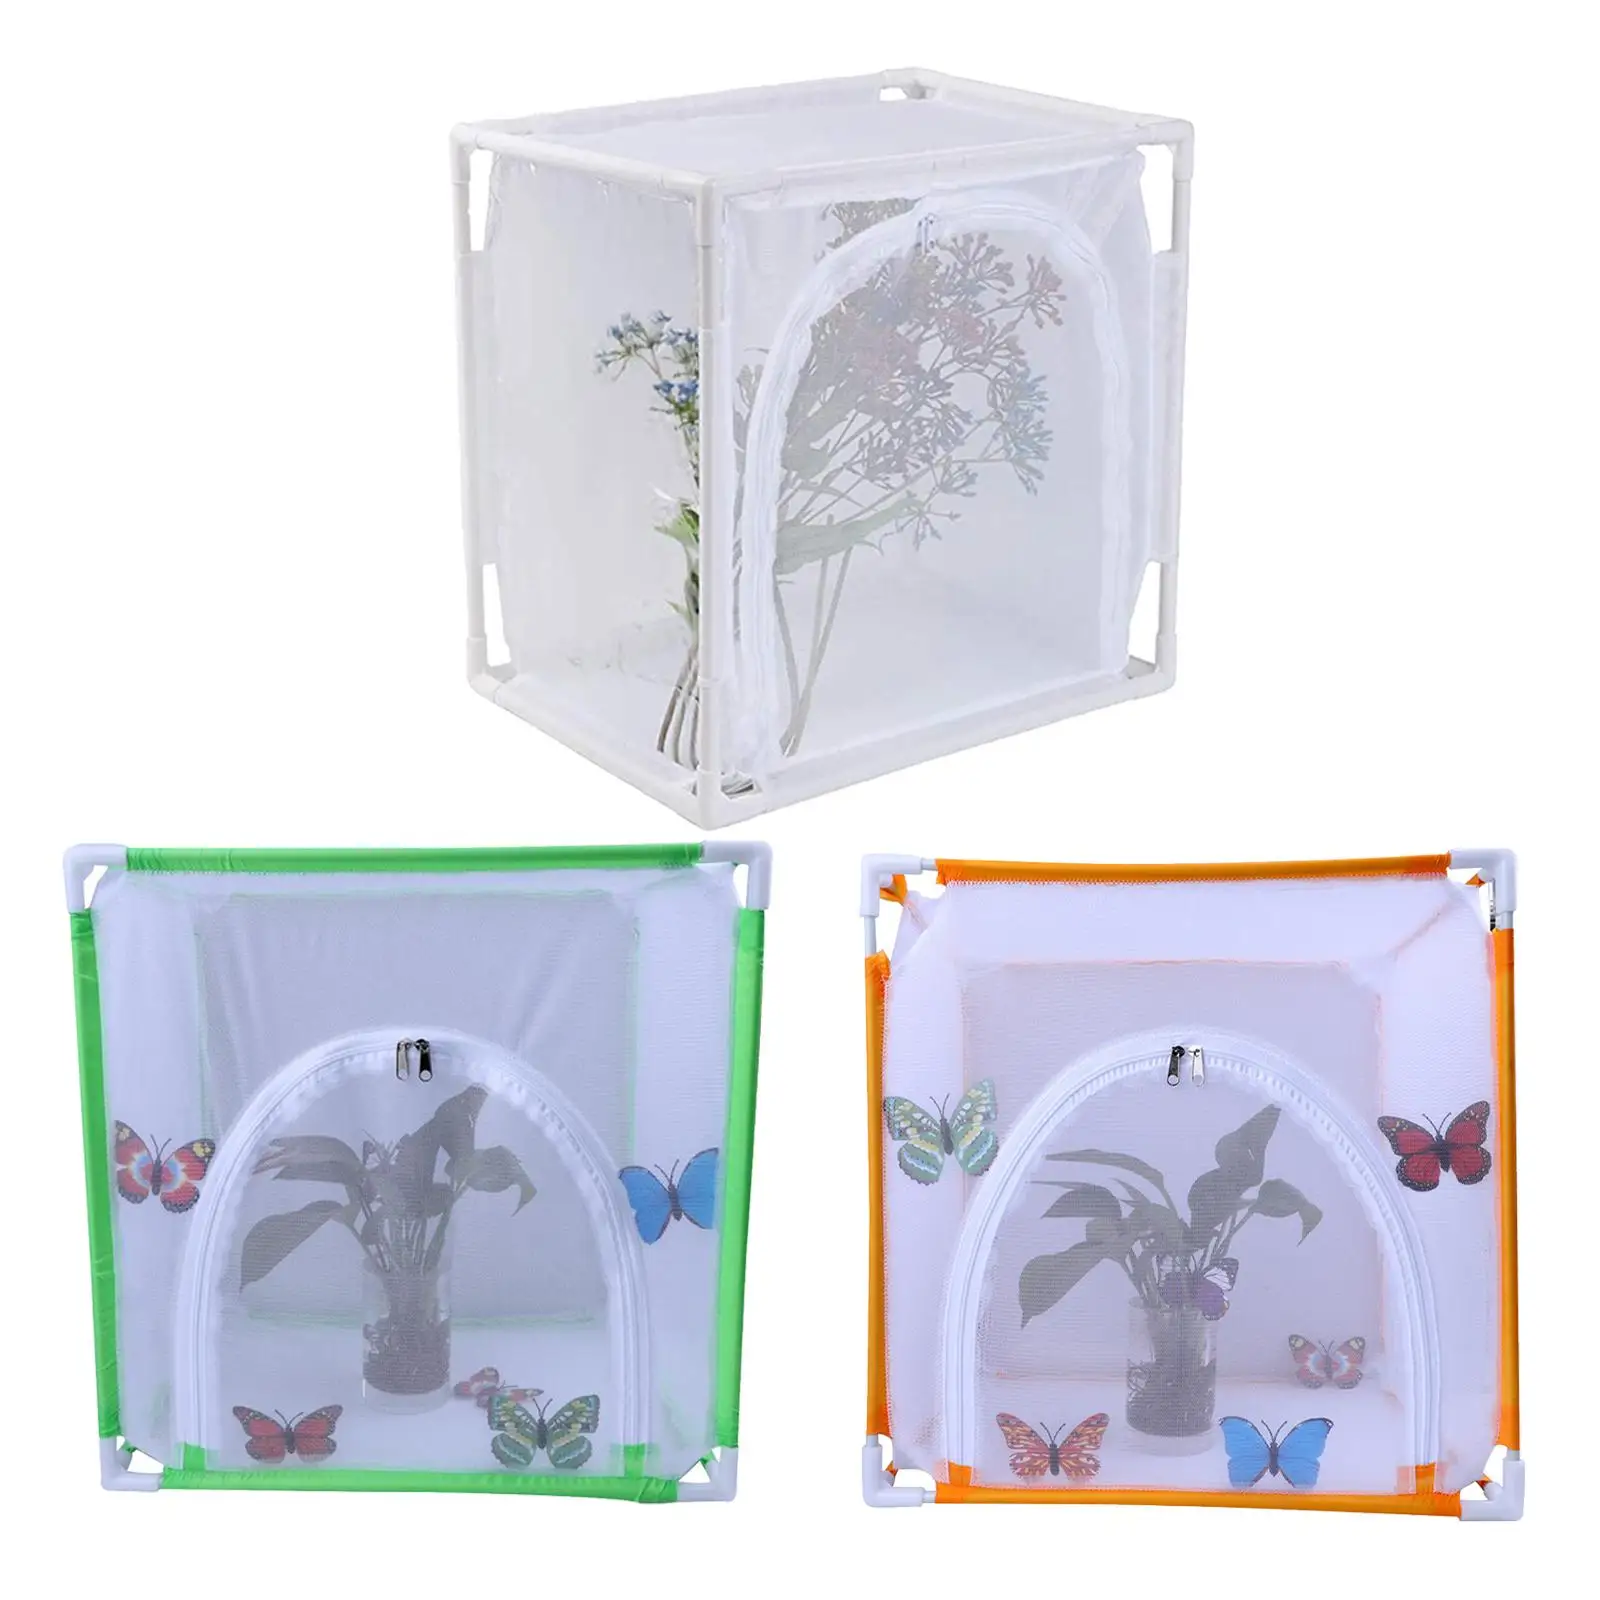 Foldable Insect Butterfly Habitat Cage Insect Mesh Cage Plant and Insects House Incubator for Caterpillars Butterfly 30x40cm